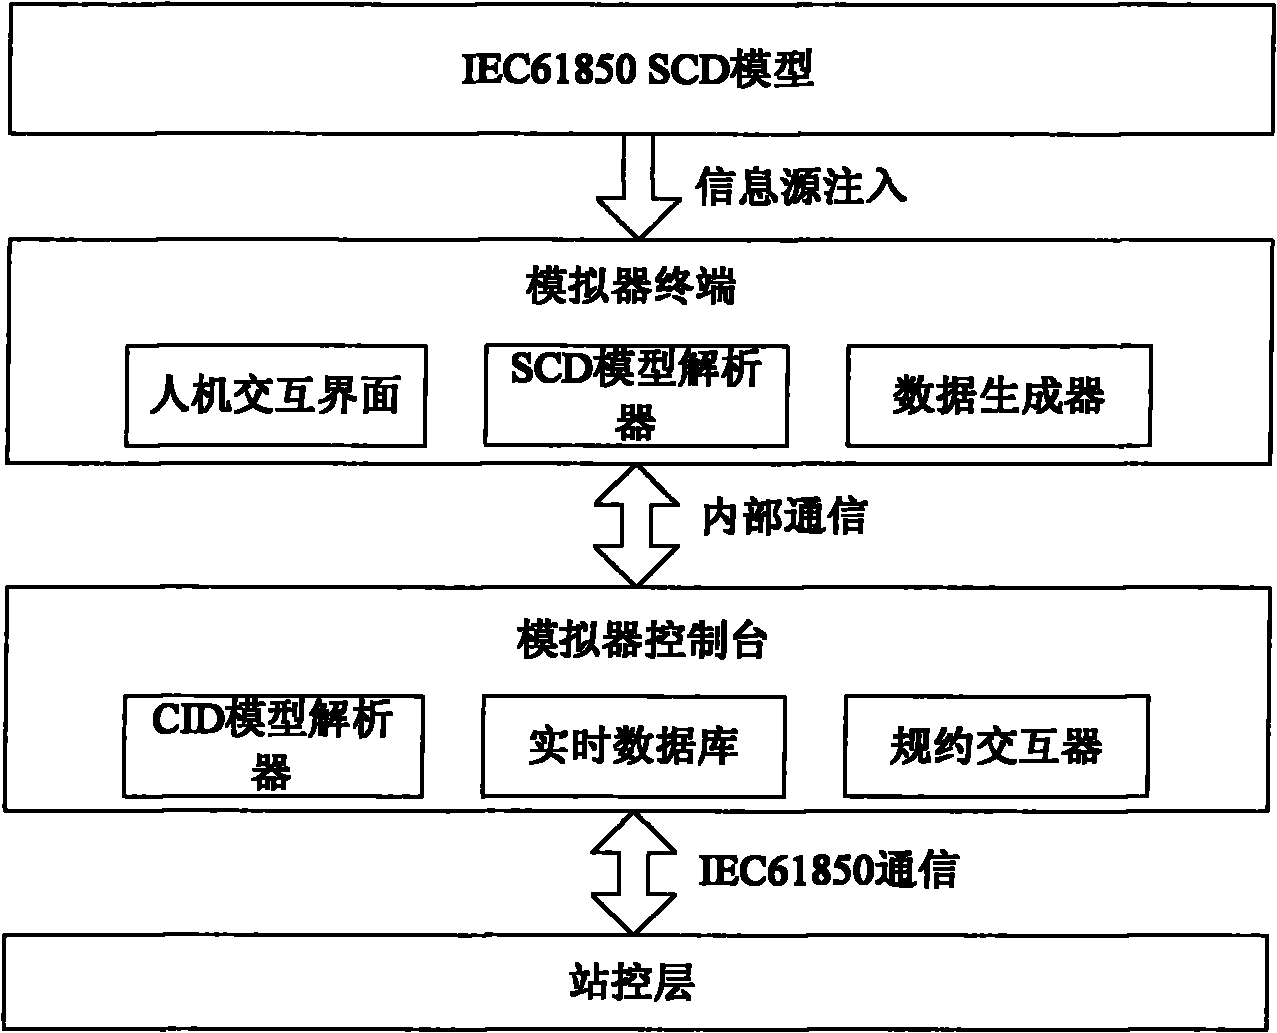 Server-side simulating system based on IEC61850 and method thereof